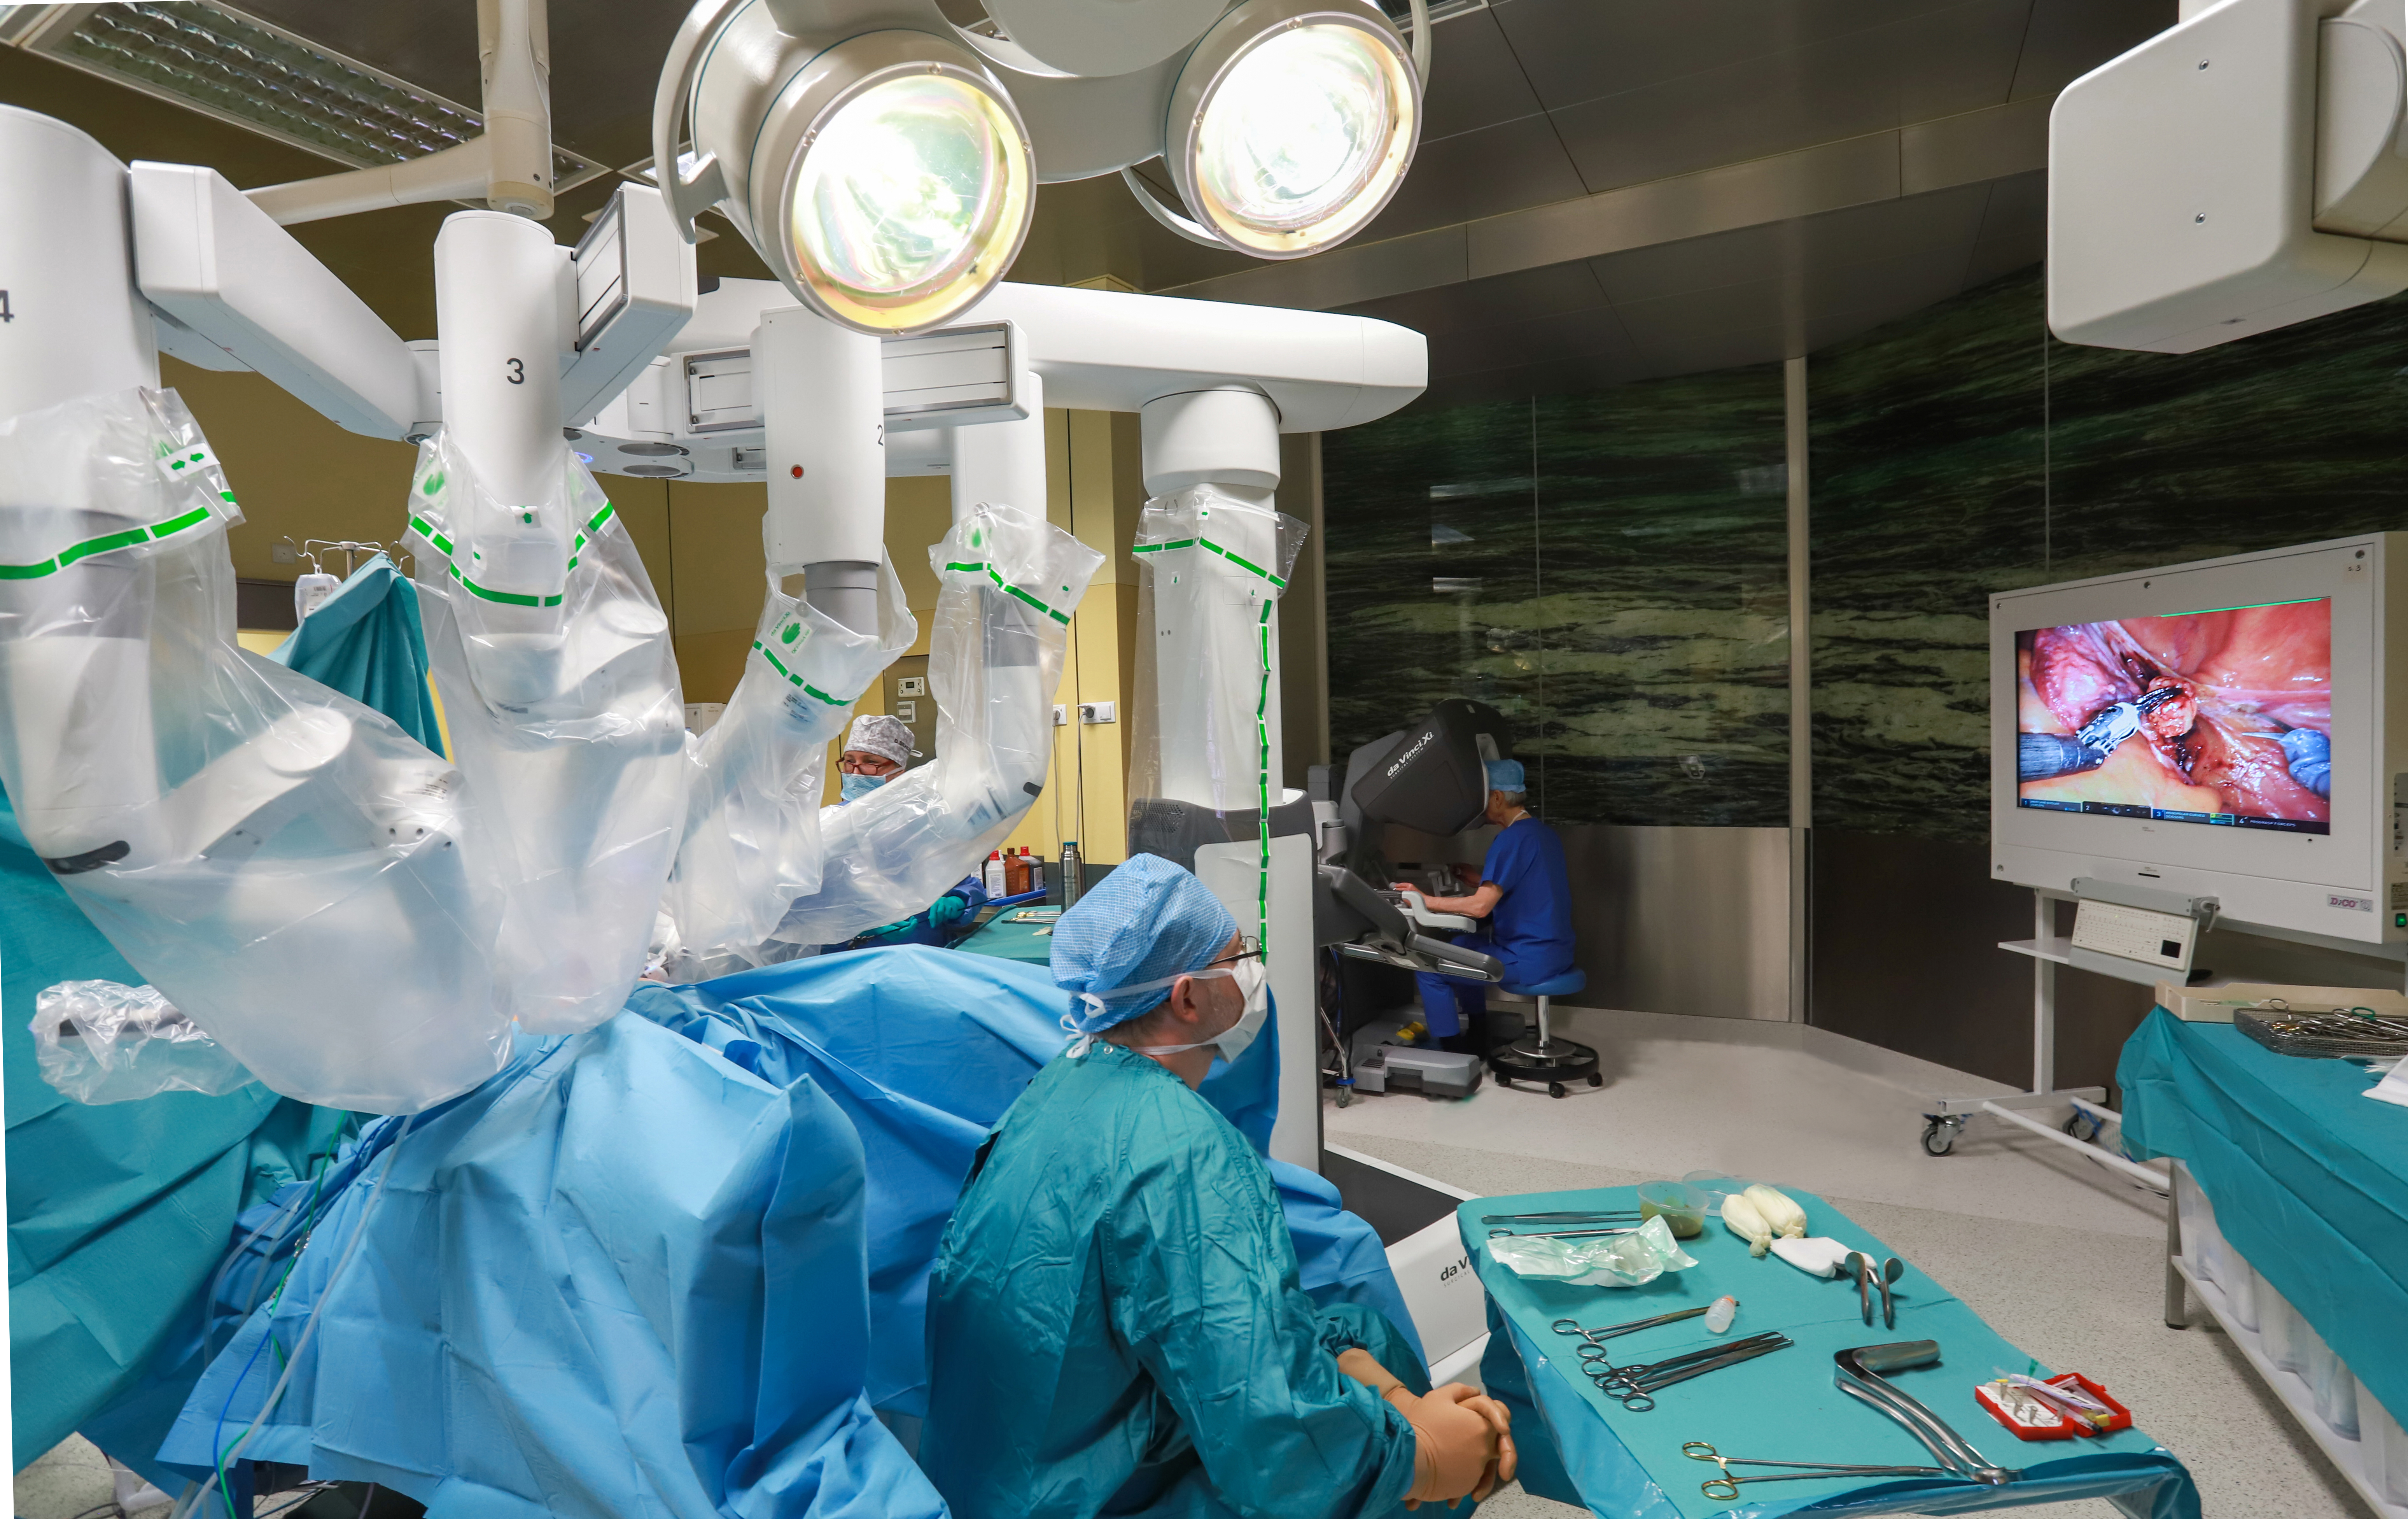 The photo presents the Vinci operating robot used during medical operations around the world.